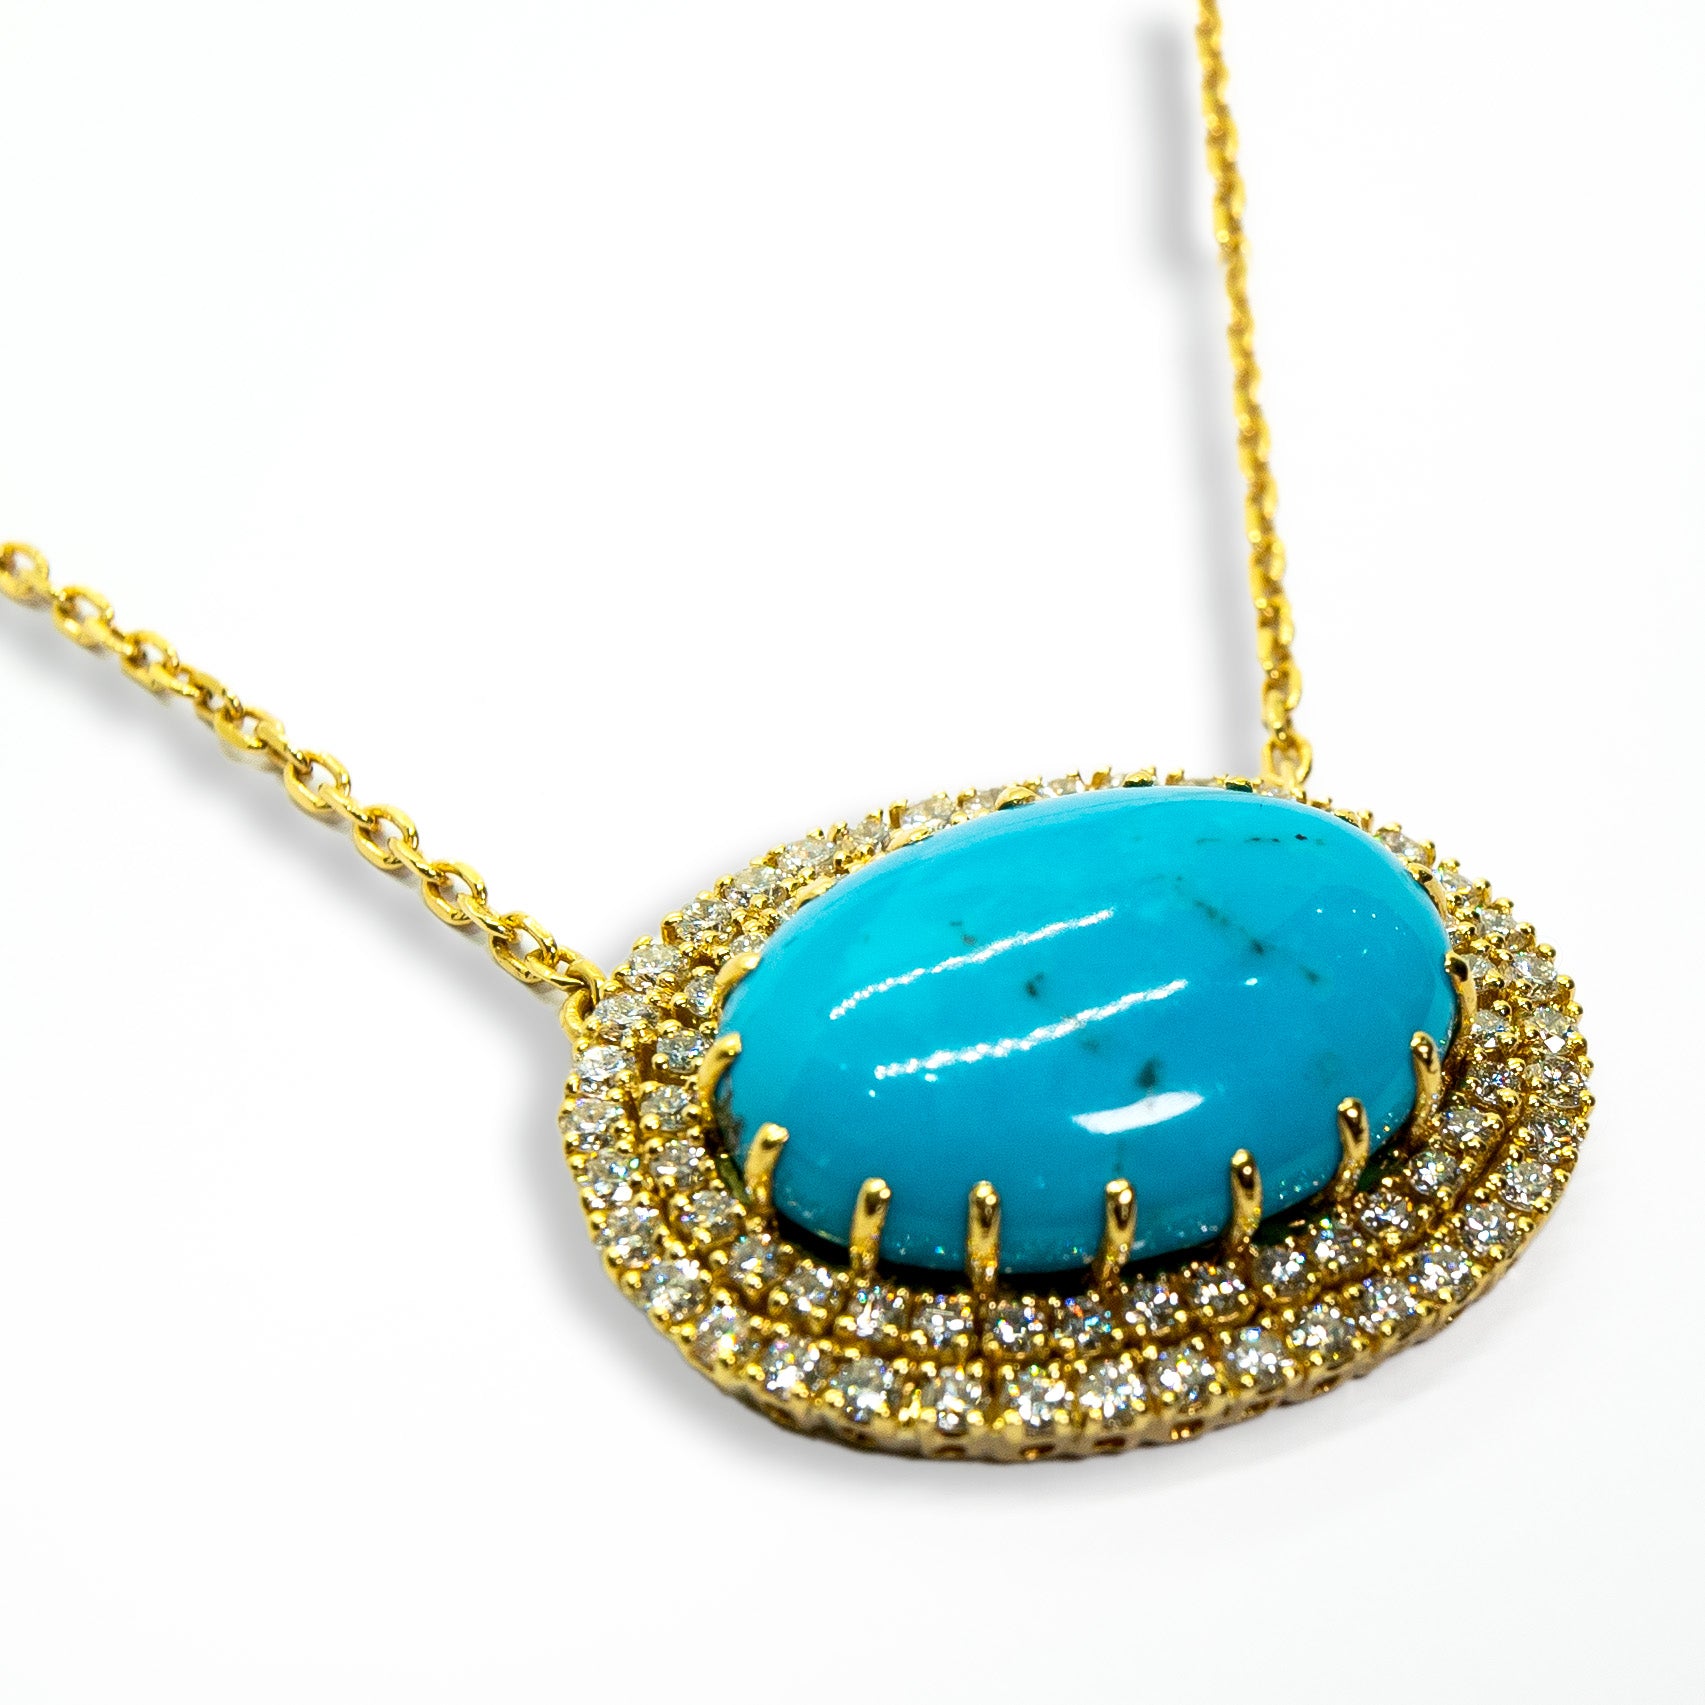 Vintage Turquoise Bead Necklace in 14k Yellow Gold - Filigree Jewelers